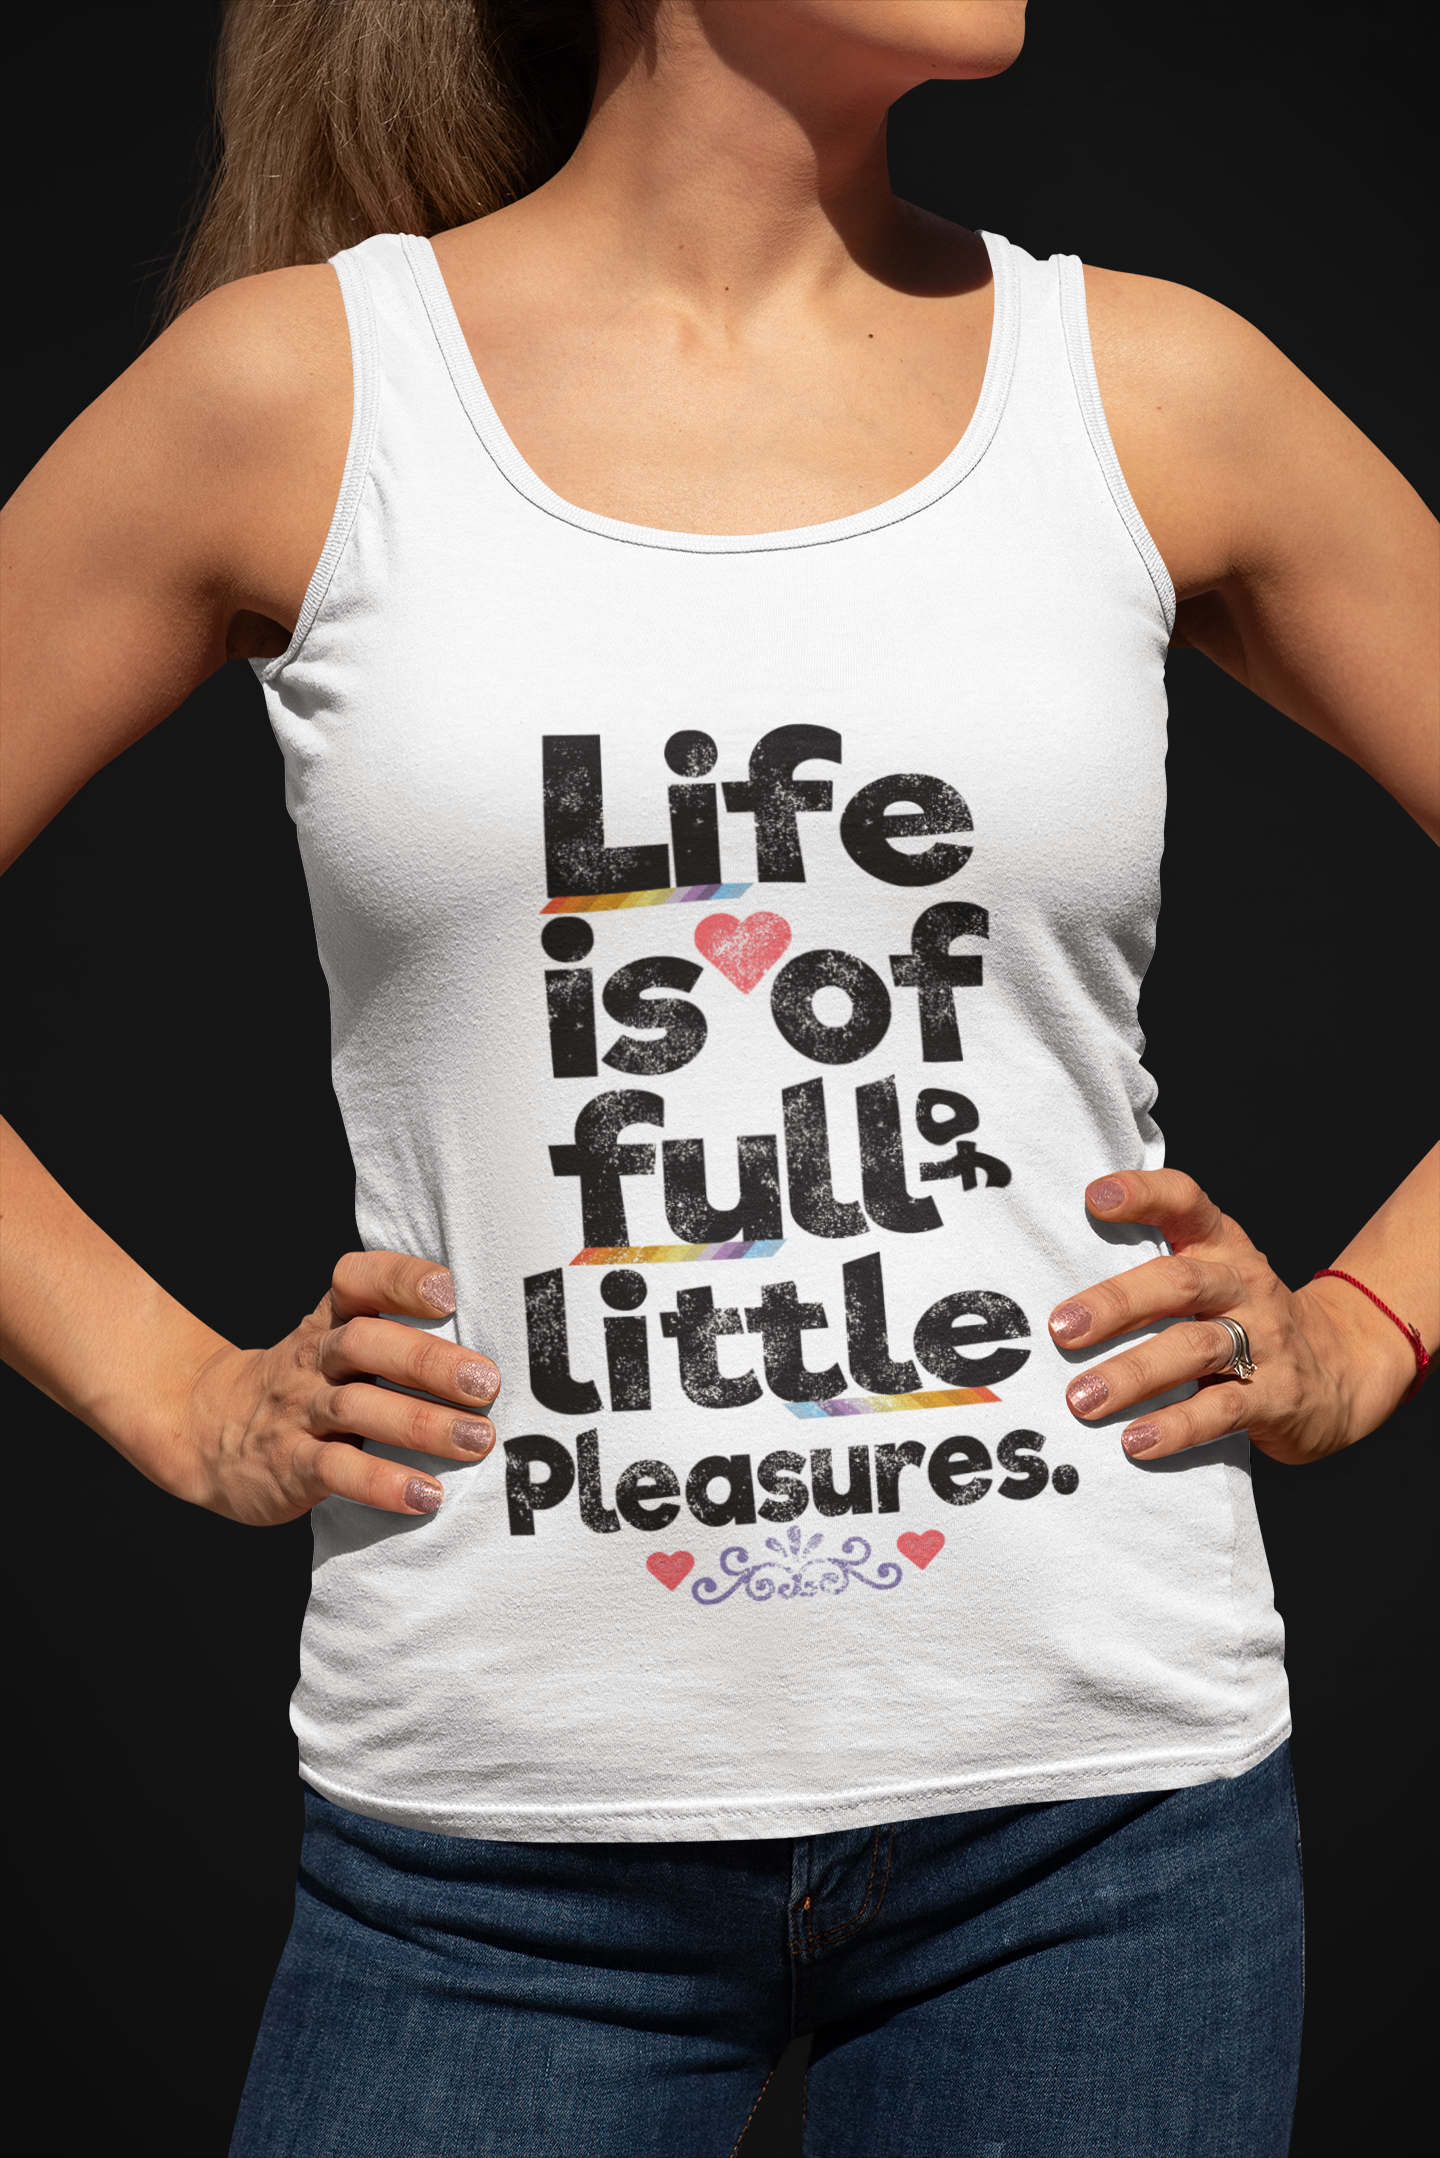 Life Is Little Pleasures White Tank Top For Women